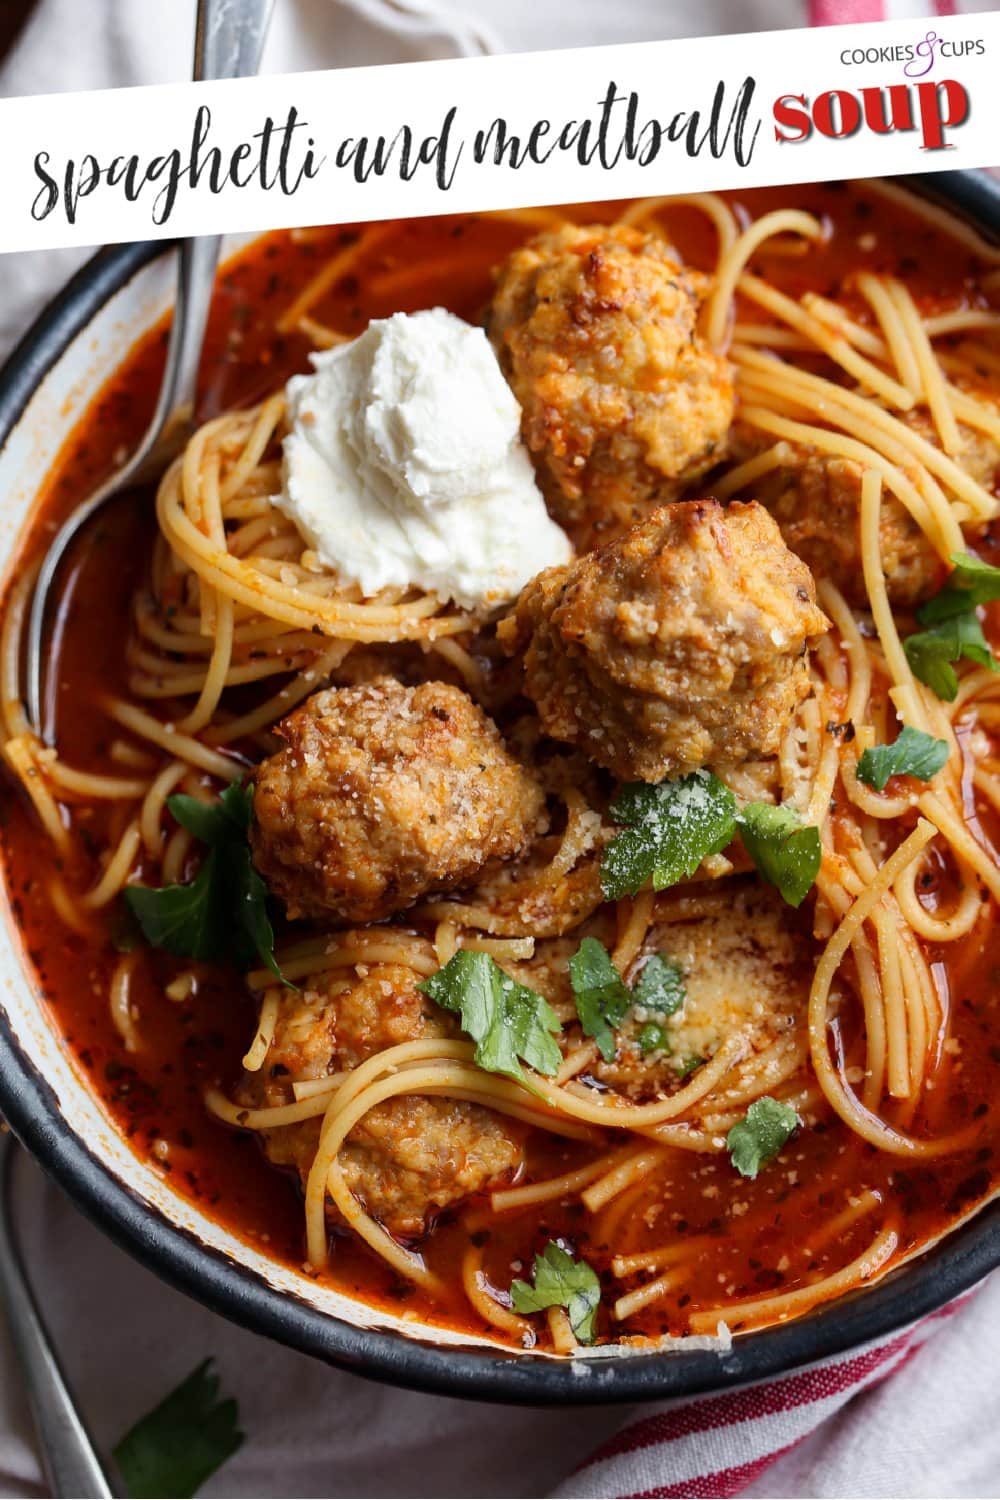 Tomato Soup with meatballs and spaghetti pinterest image